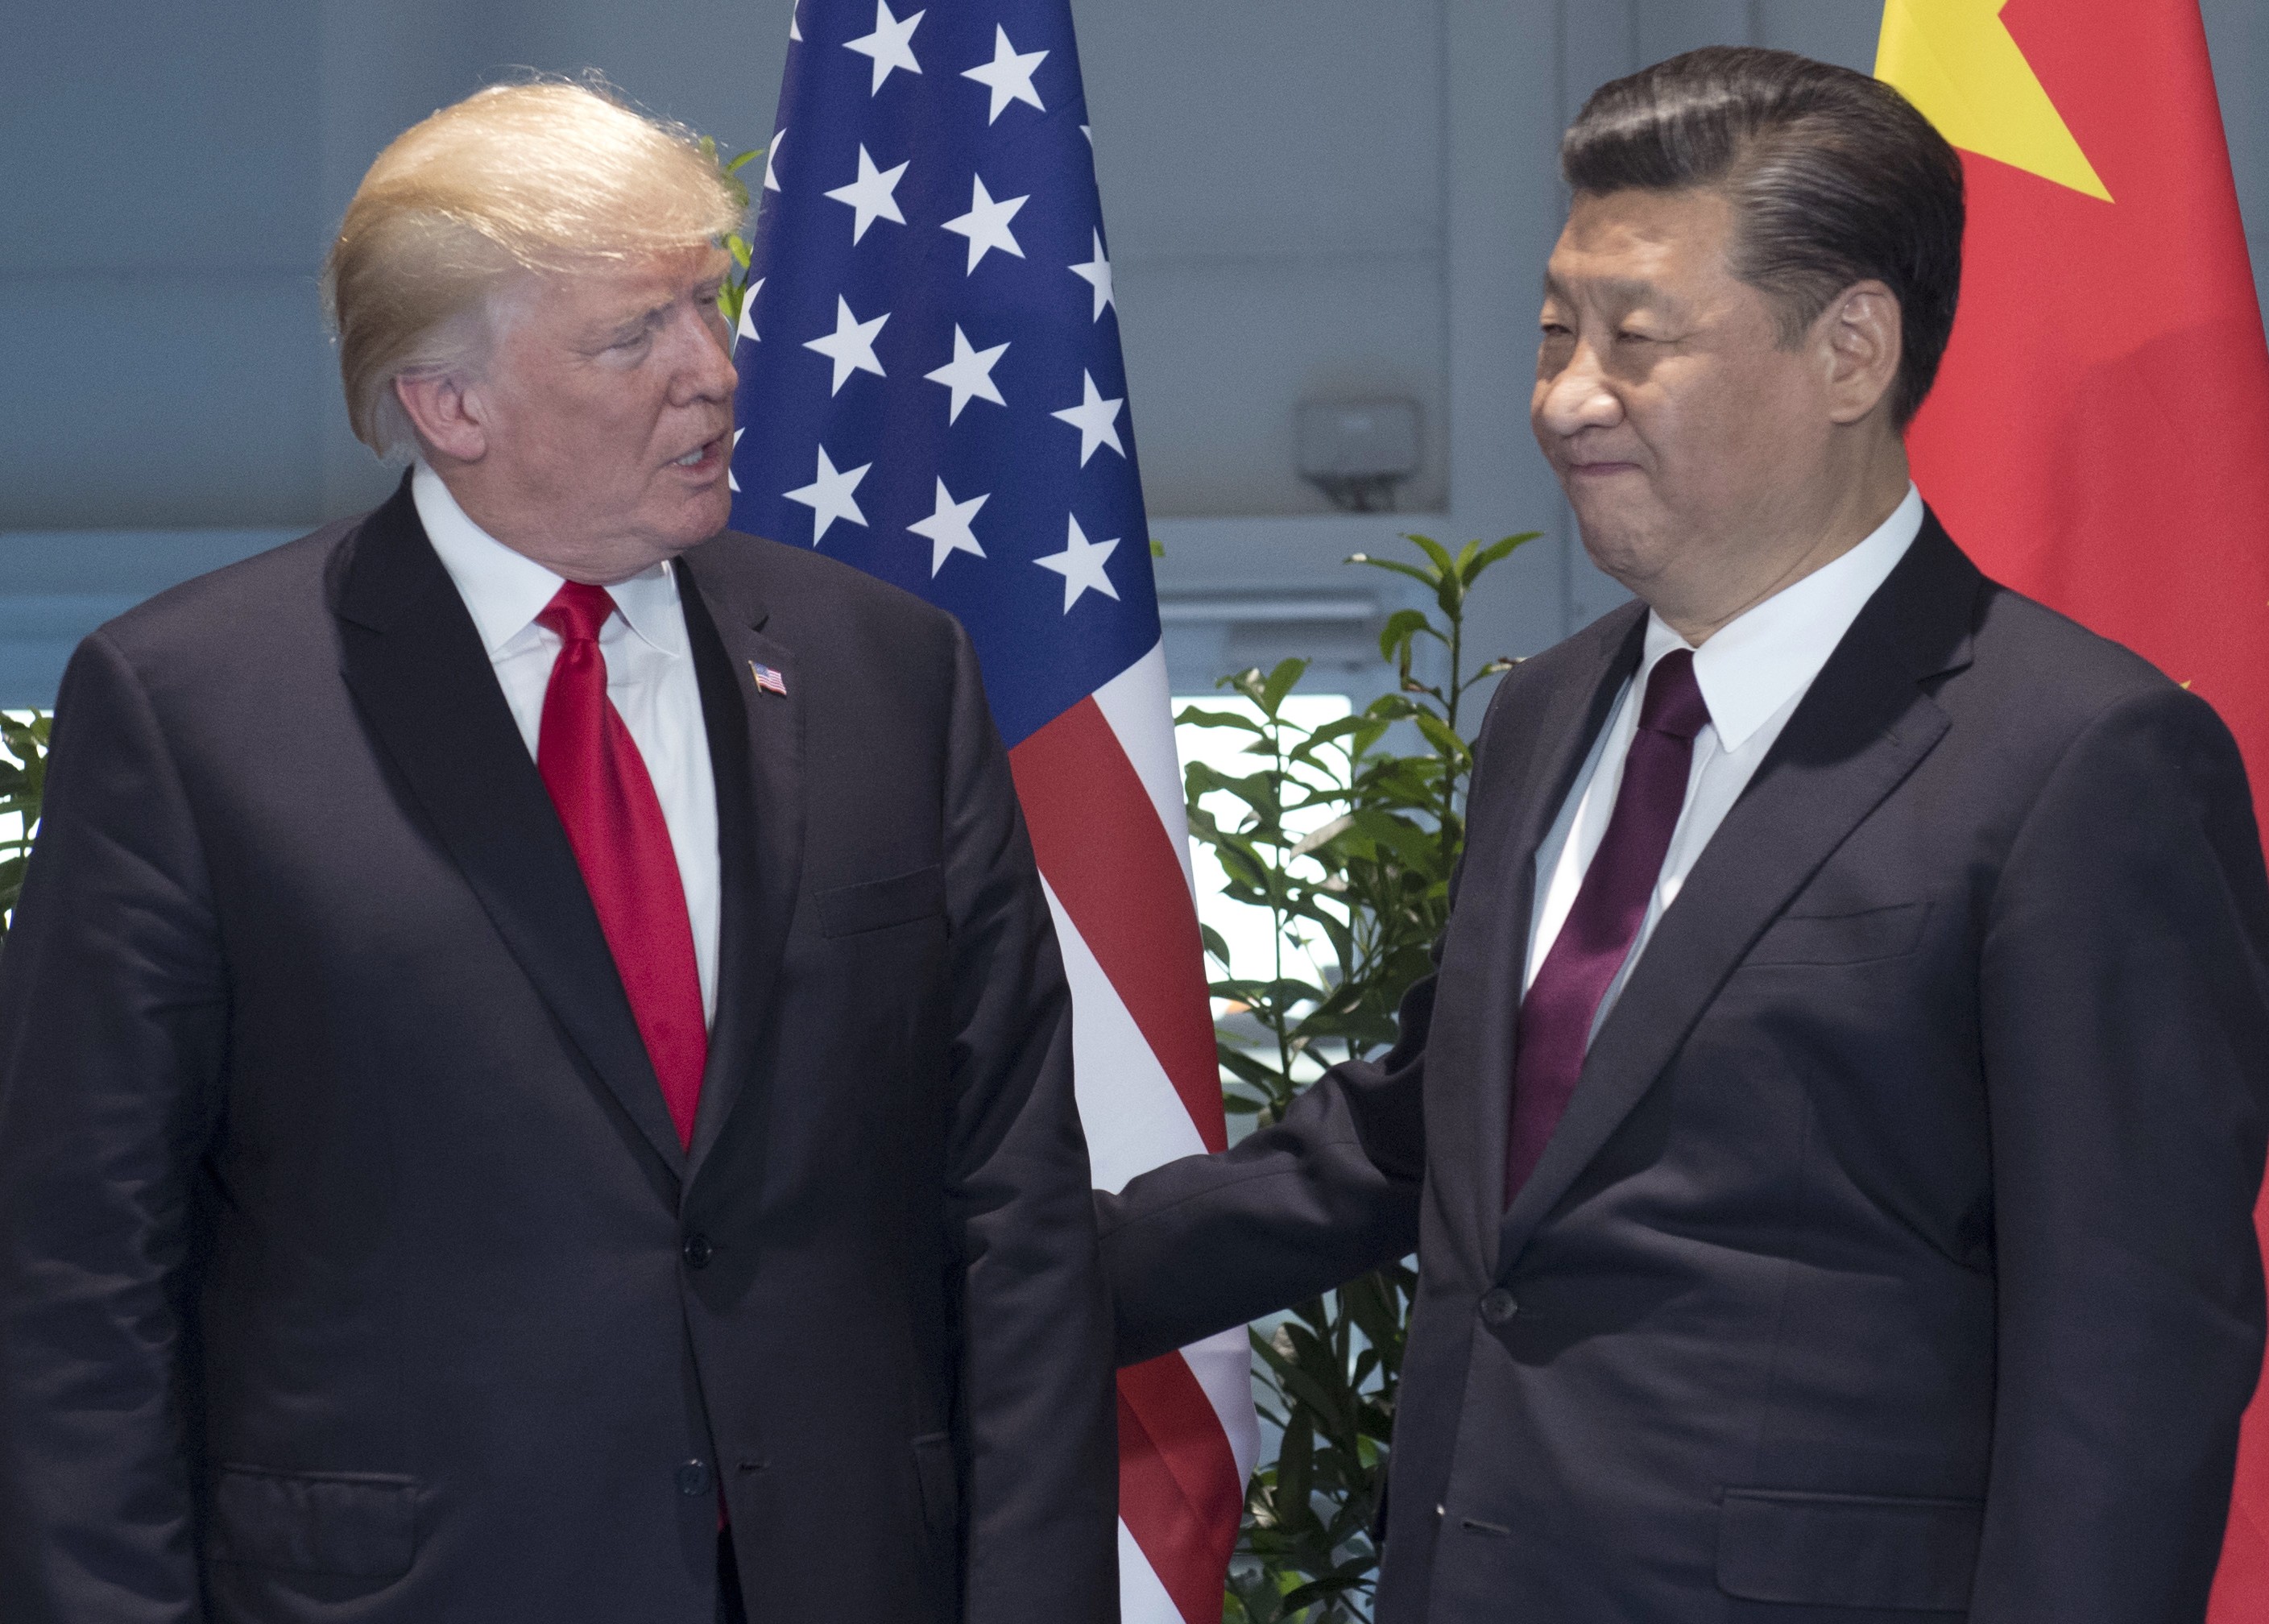 US President Donald Trump and Chinese President Xi Jinping meet on the sidelines of the G20 Summit in Hamburg, Germany, in July this year. Photo: AP